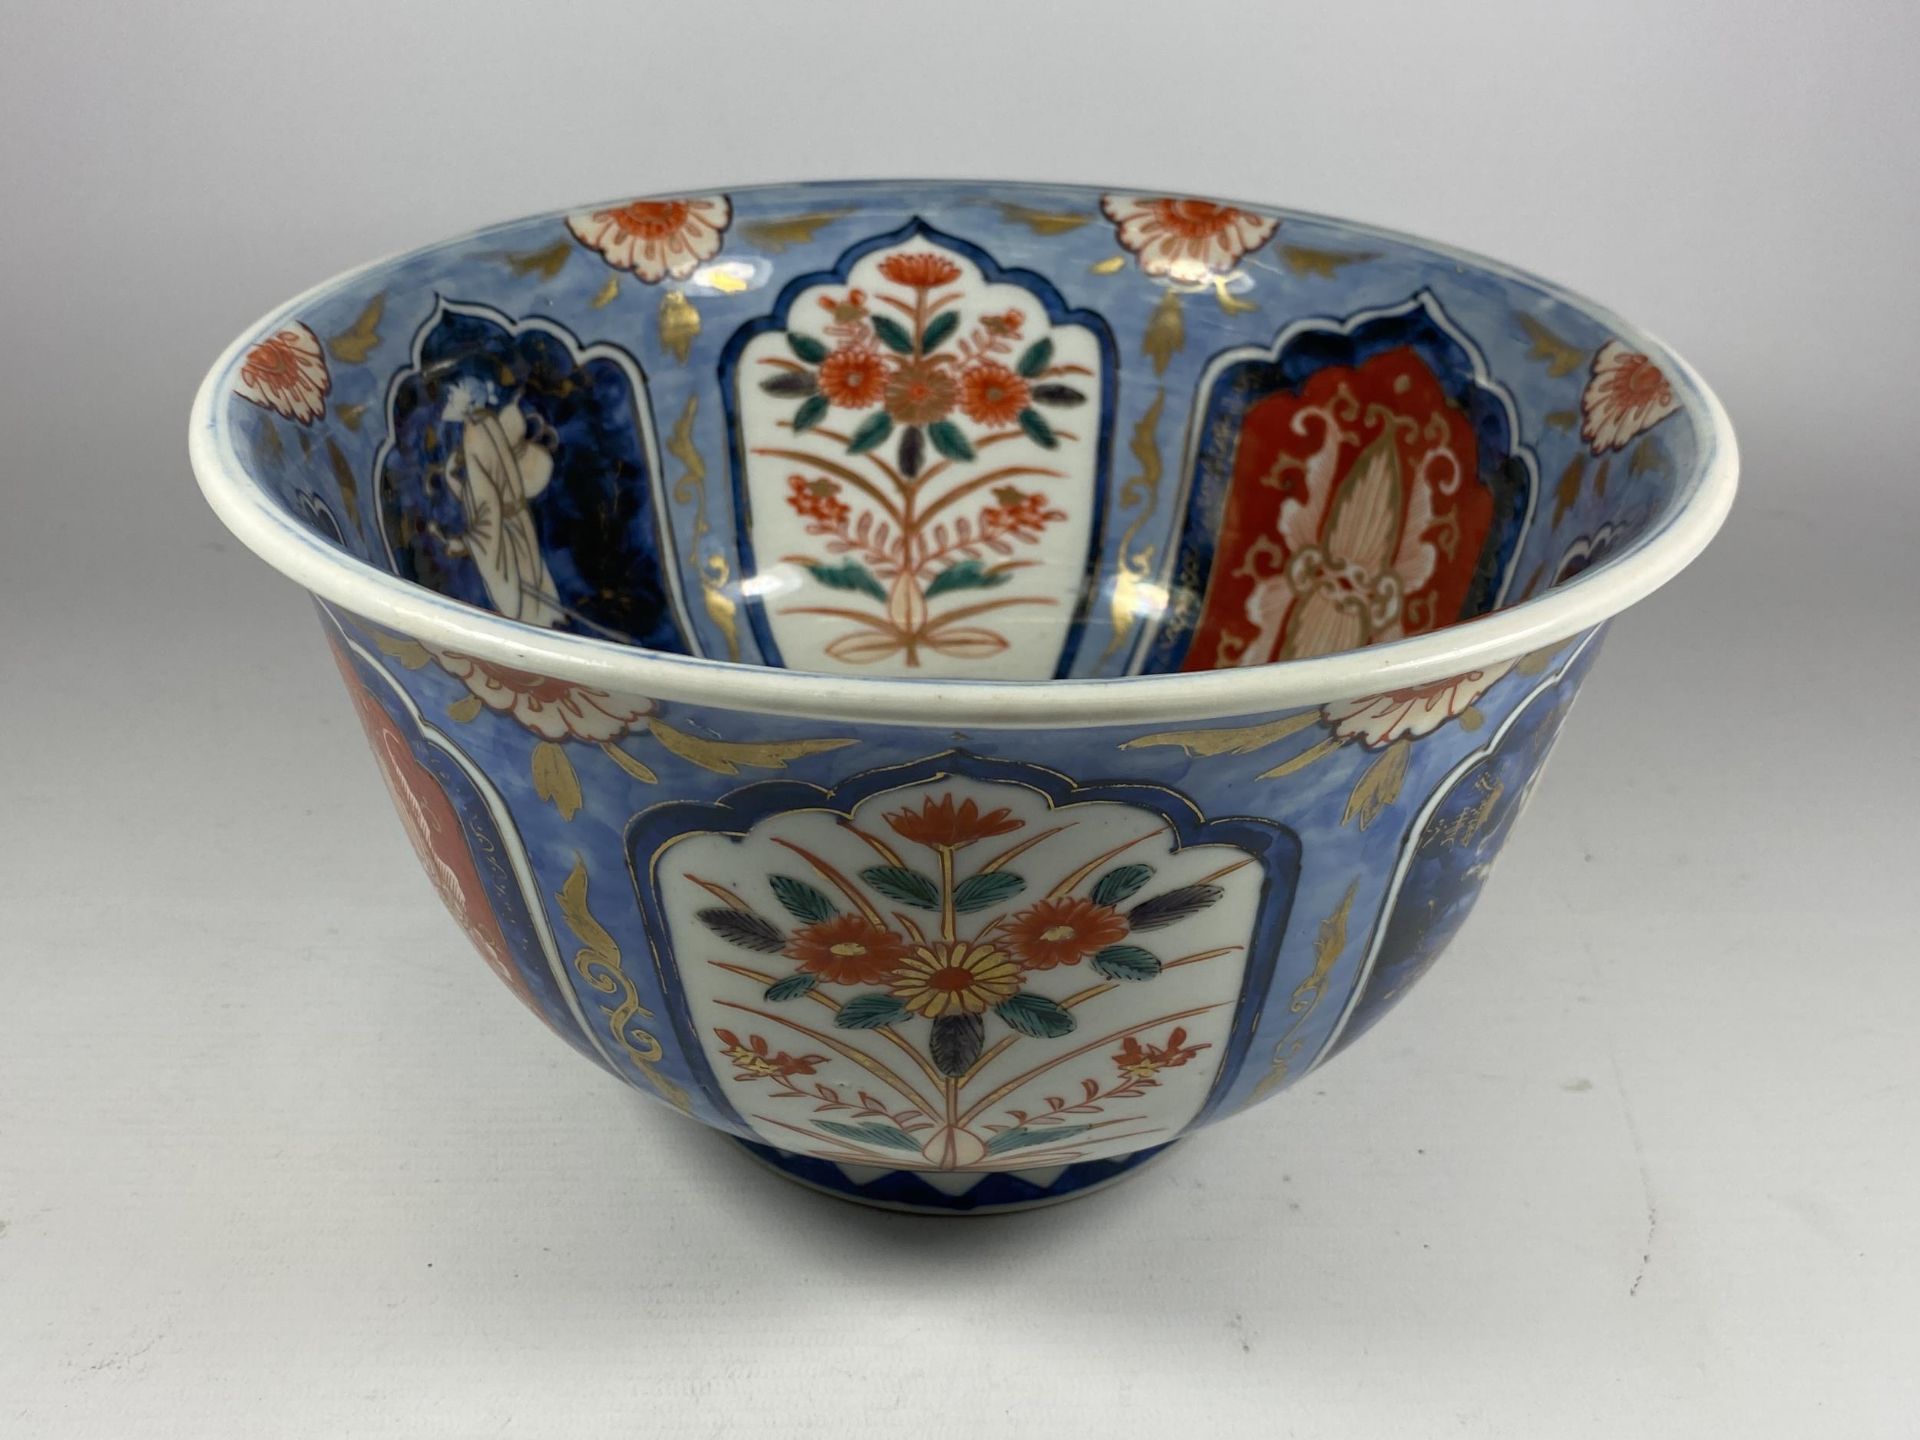 A LARGE JAPANESE MEIJI PERIOD (1868-1912) IMARI BOWL WITH SIX CHARACTER MARK TO BASE, DIAMETER 25.